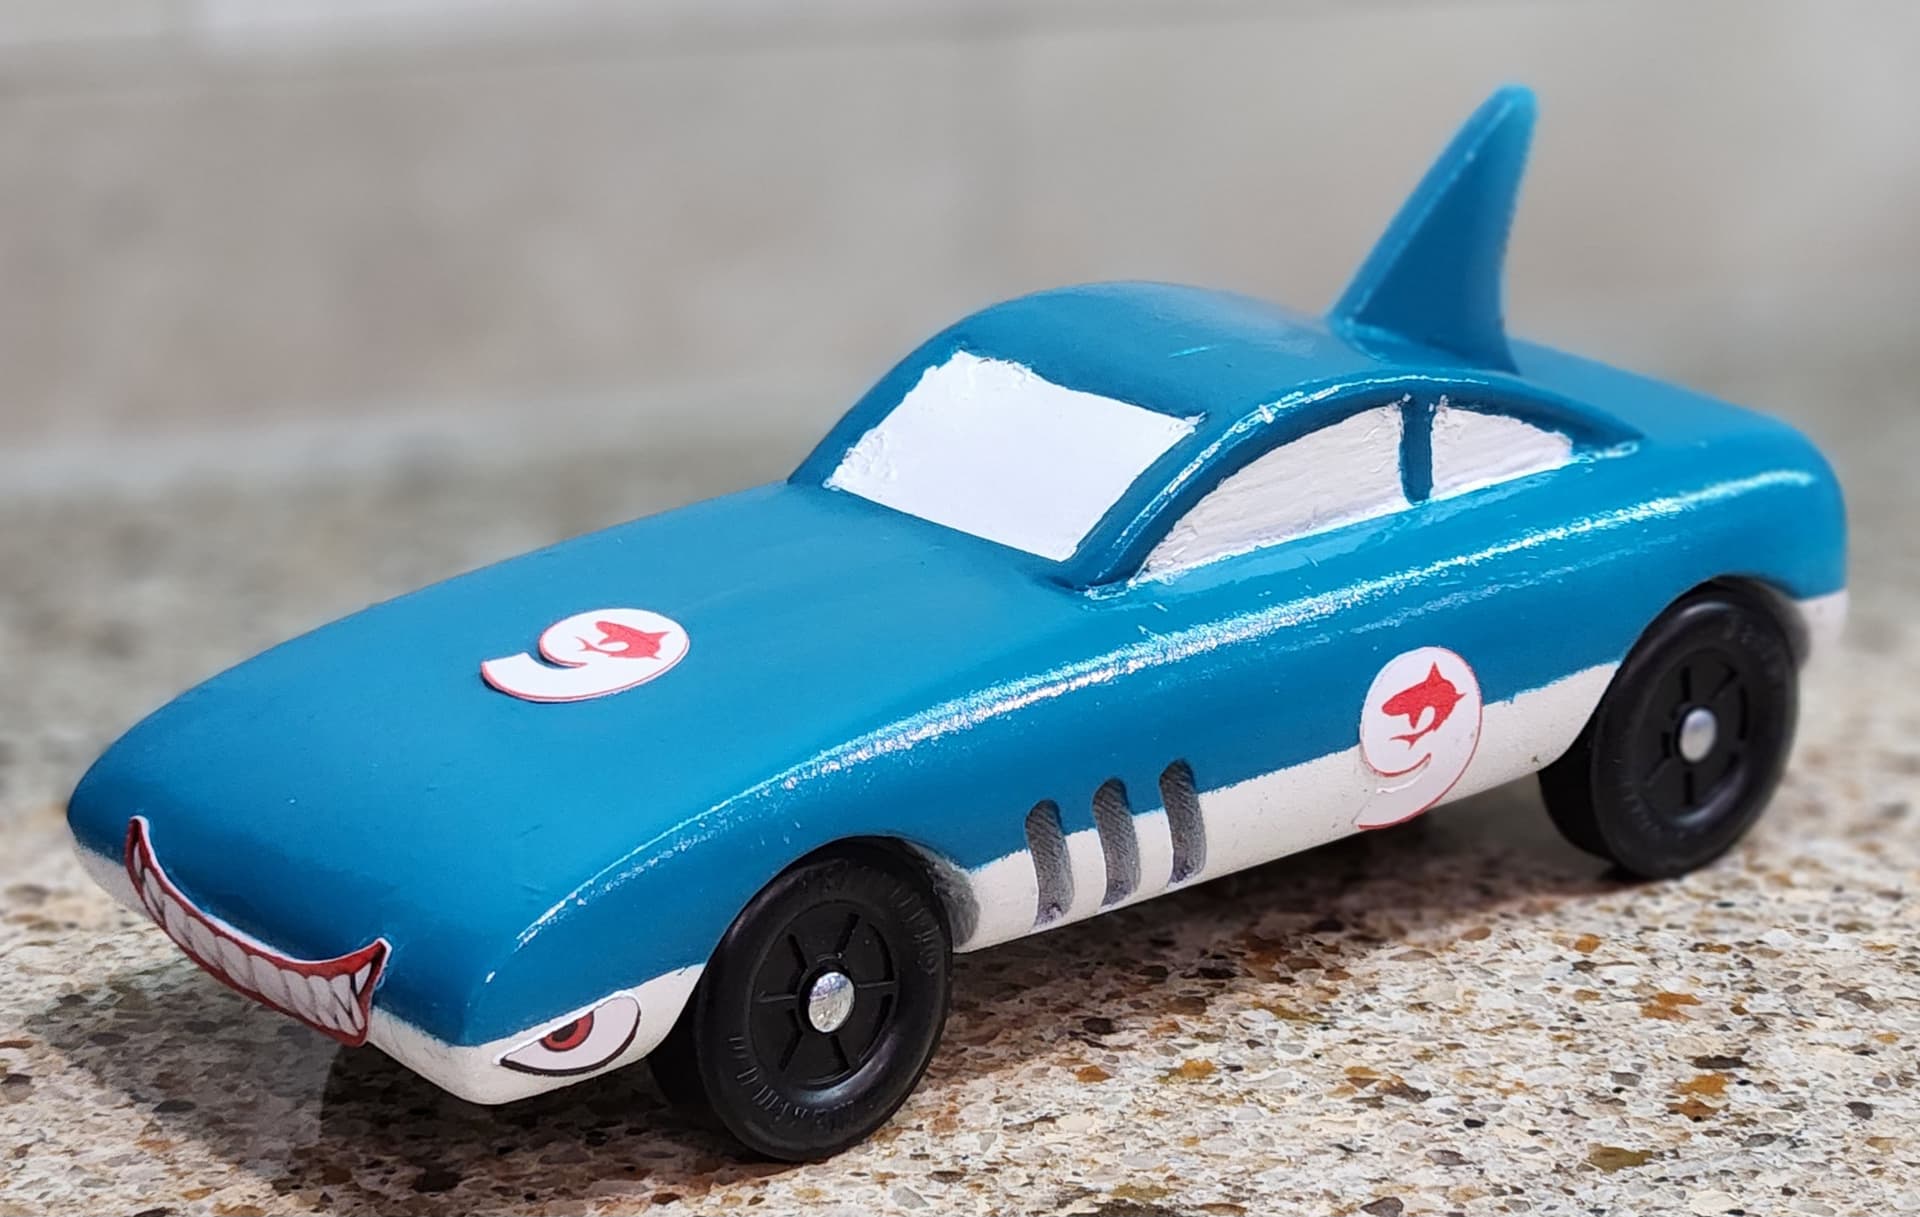 Megaladon - Pinewood Derby Car - Things You've Made - V1 Engineering Forum